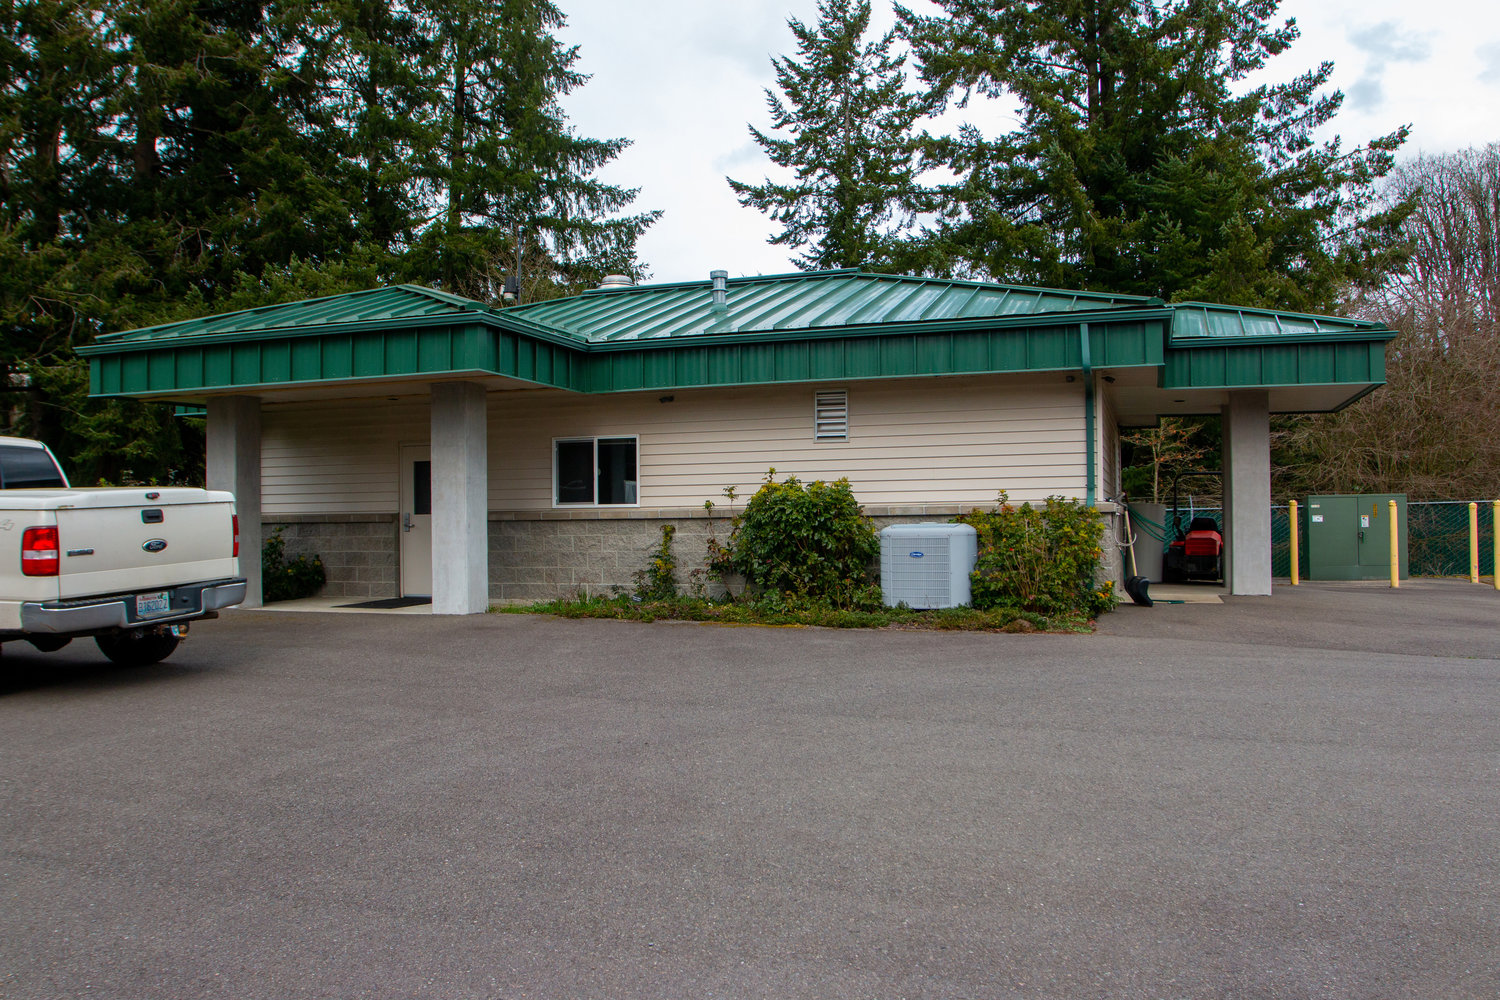 This building is the laboratory for the Tenino Wastewater Treatment Plant.